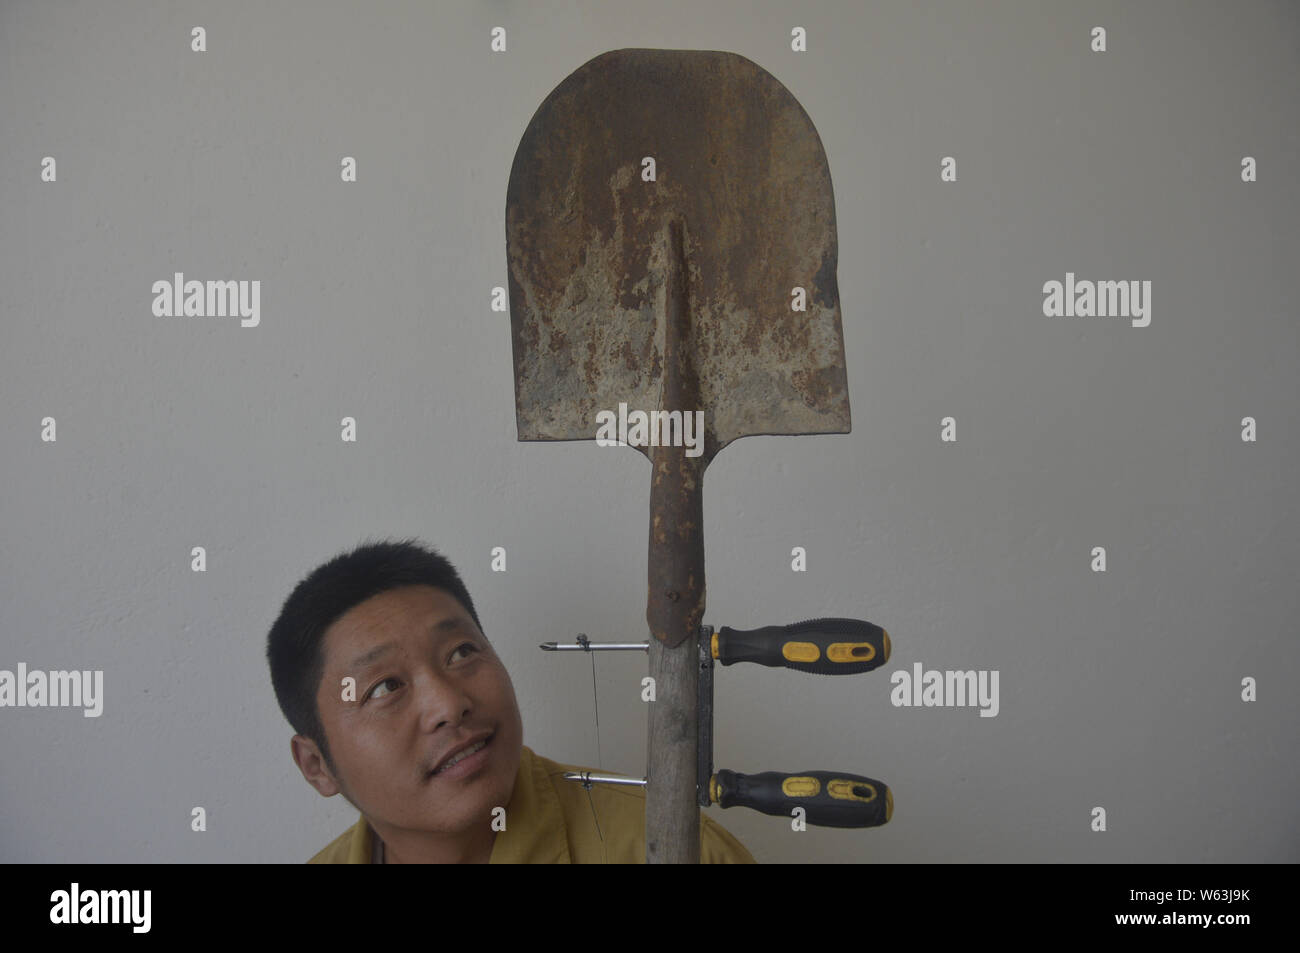 Chinese farmer Zhu Yue plays a self-made Chinese bowed musical instrument 'erhu' from a shovel, a milk powder tin and two screwdrivers in a village in Stock Photo